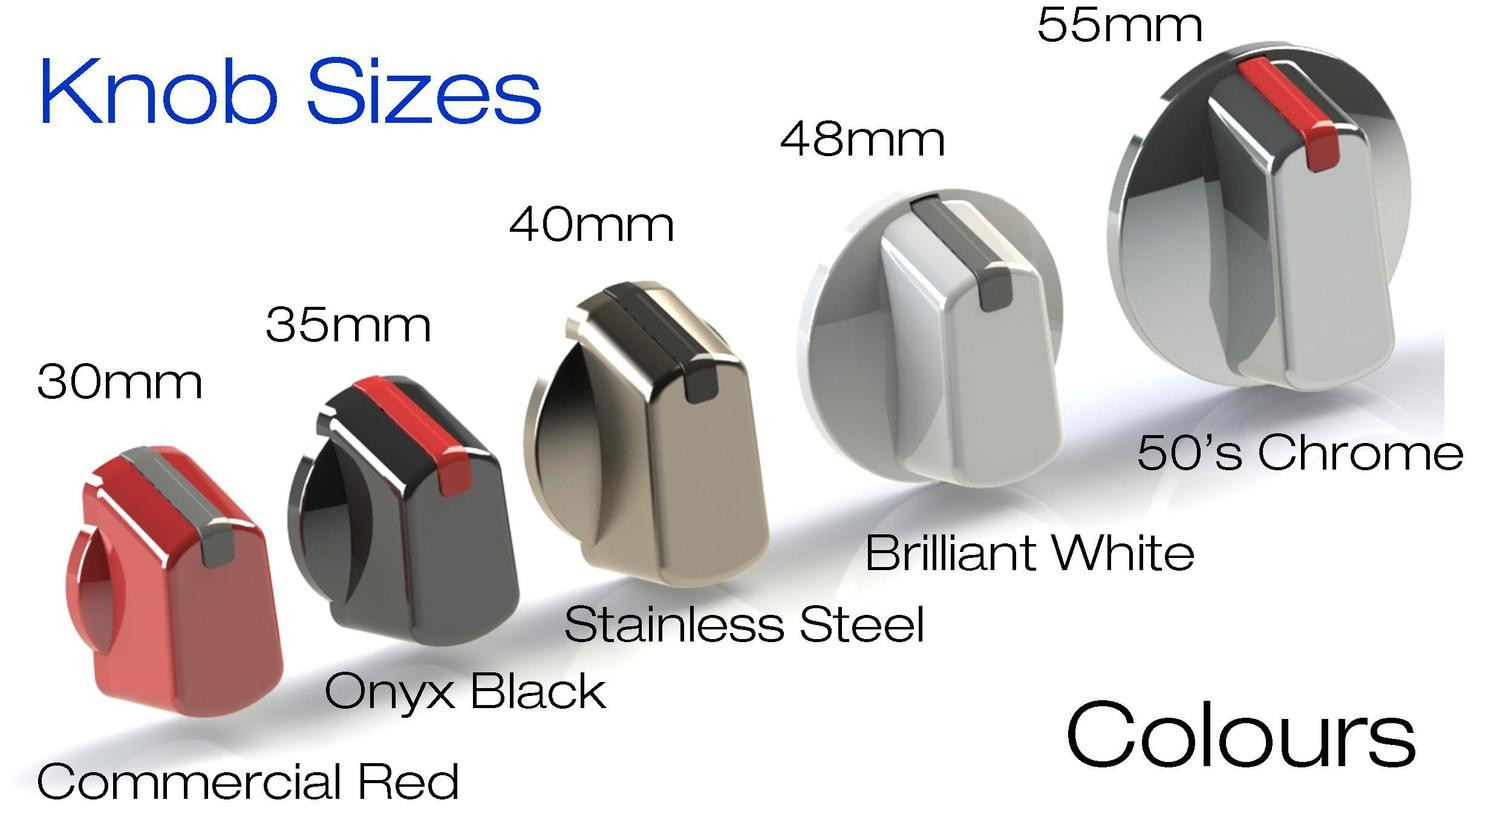 Universal Cooker Knobs spare parts